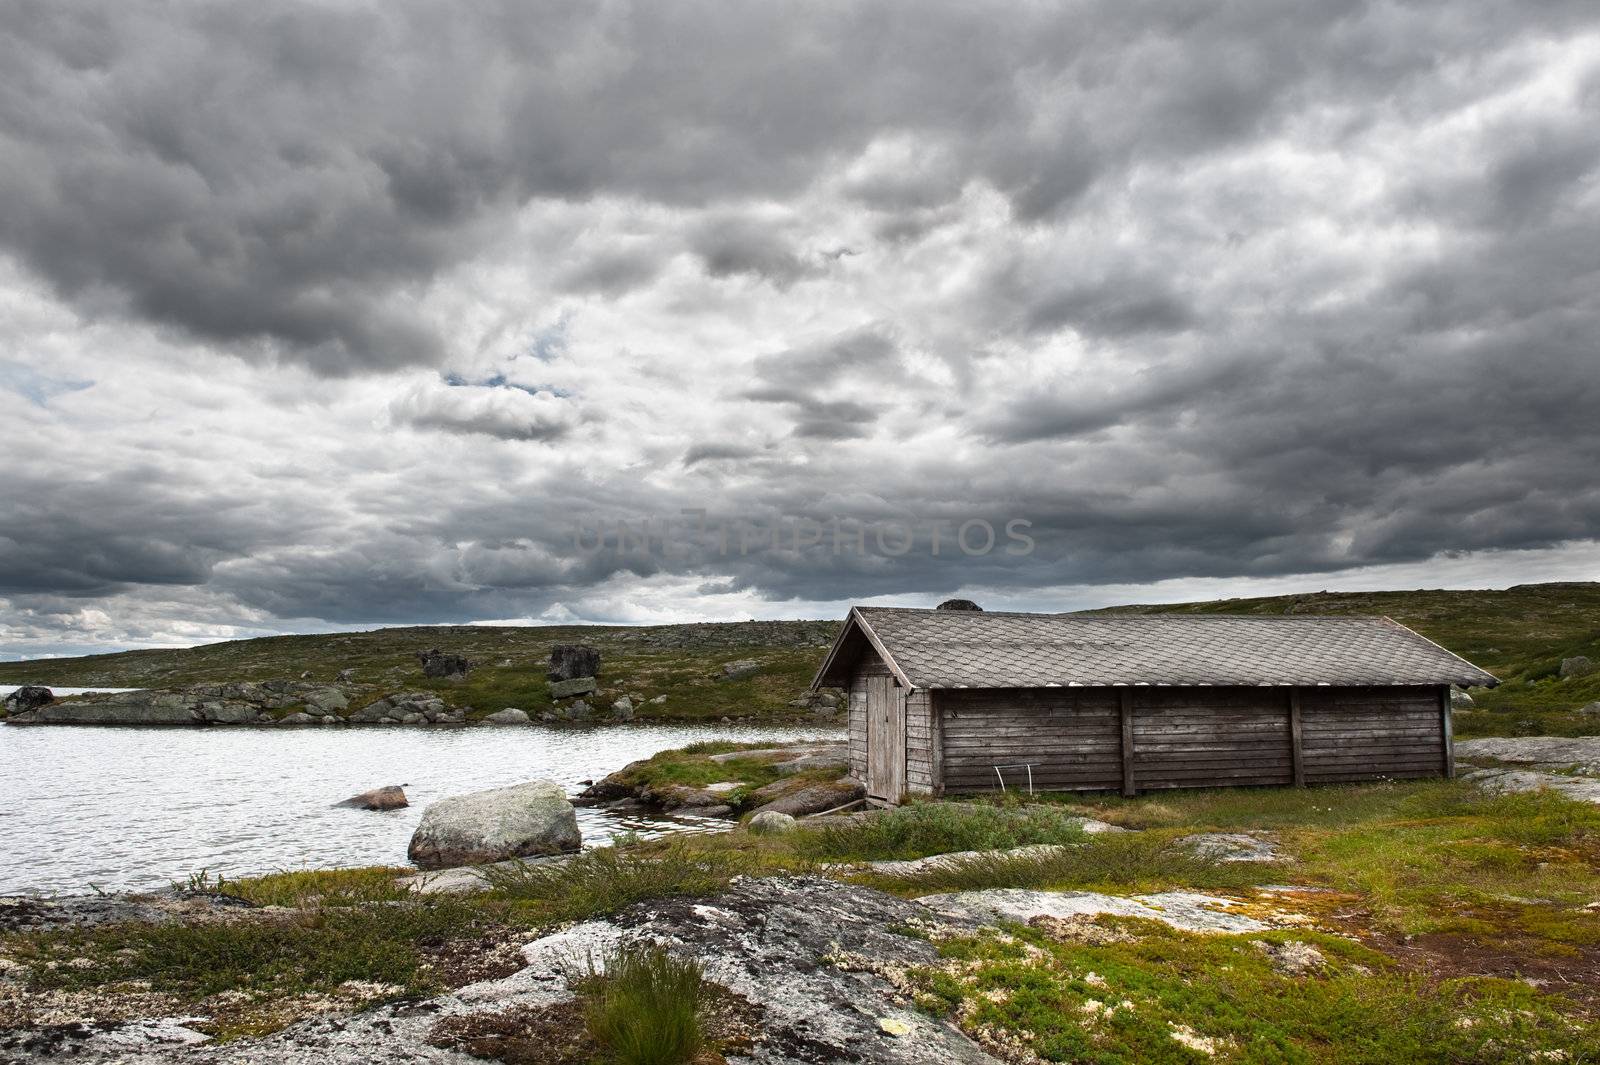 Landscape on the mountain passage between Oslo and Bergen in stormy weather